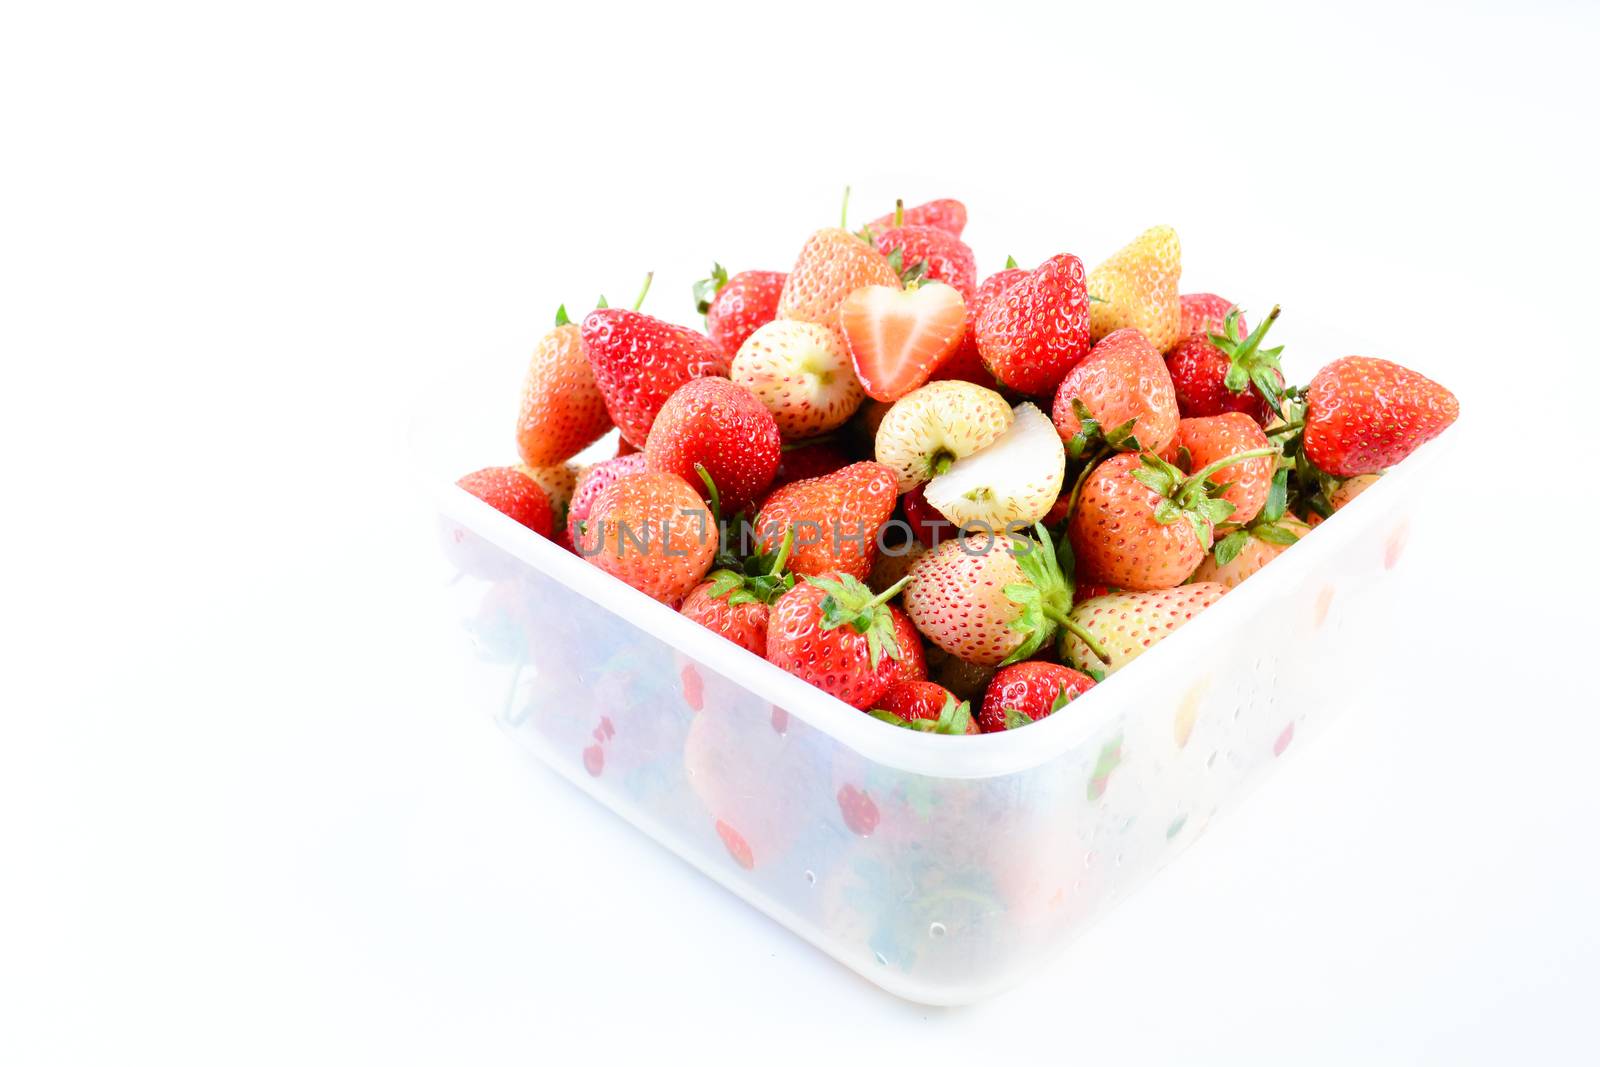 a punnet of strawberries on white background by yuiyuize